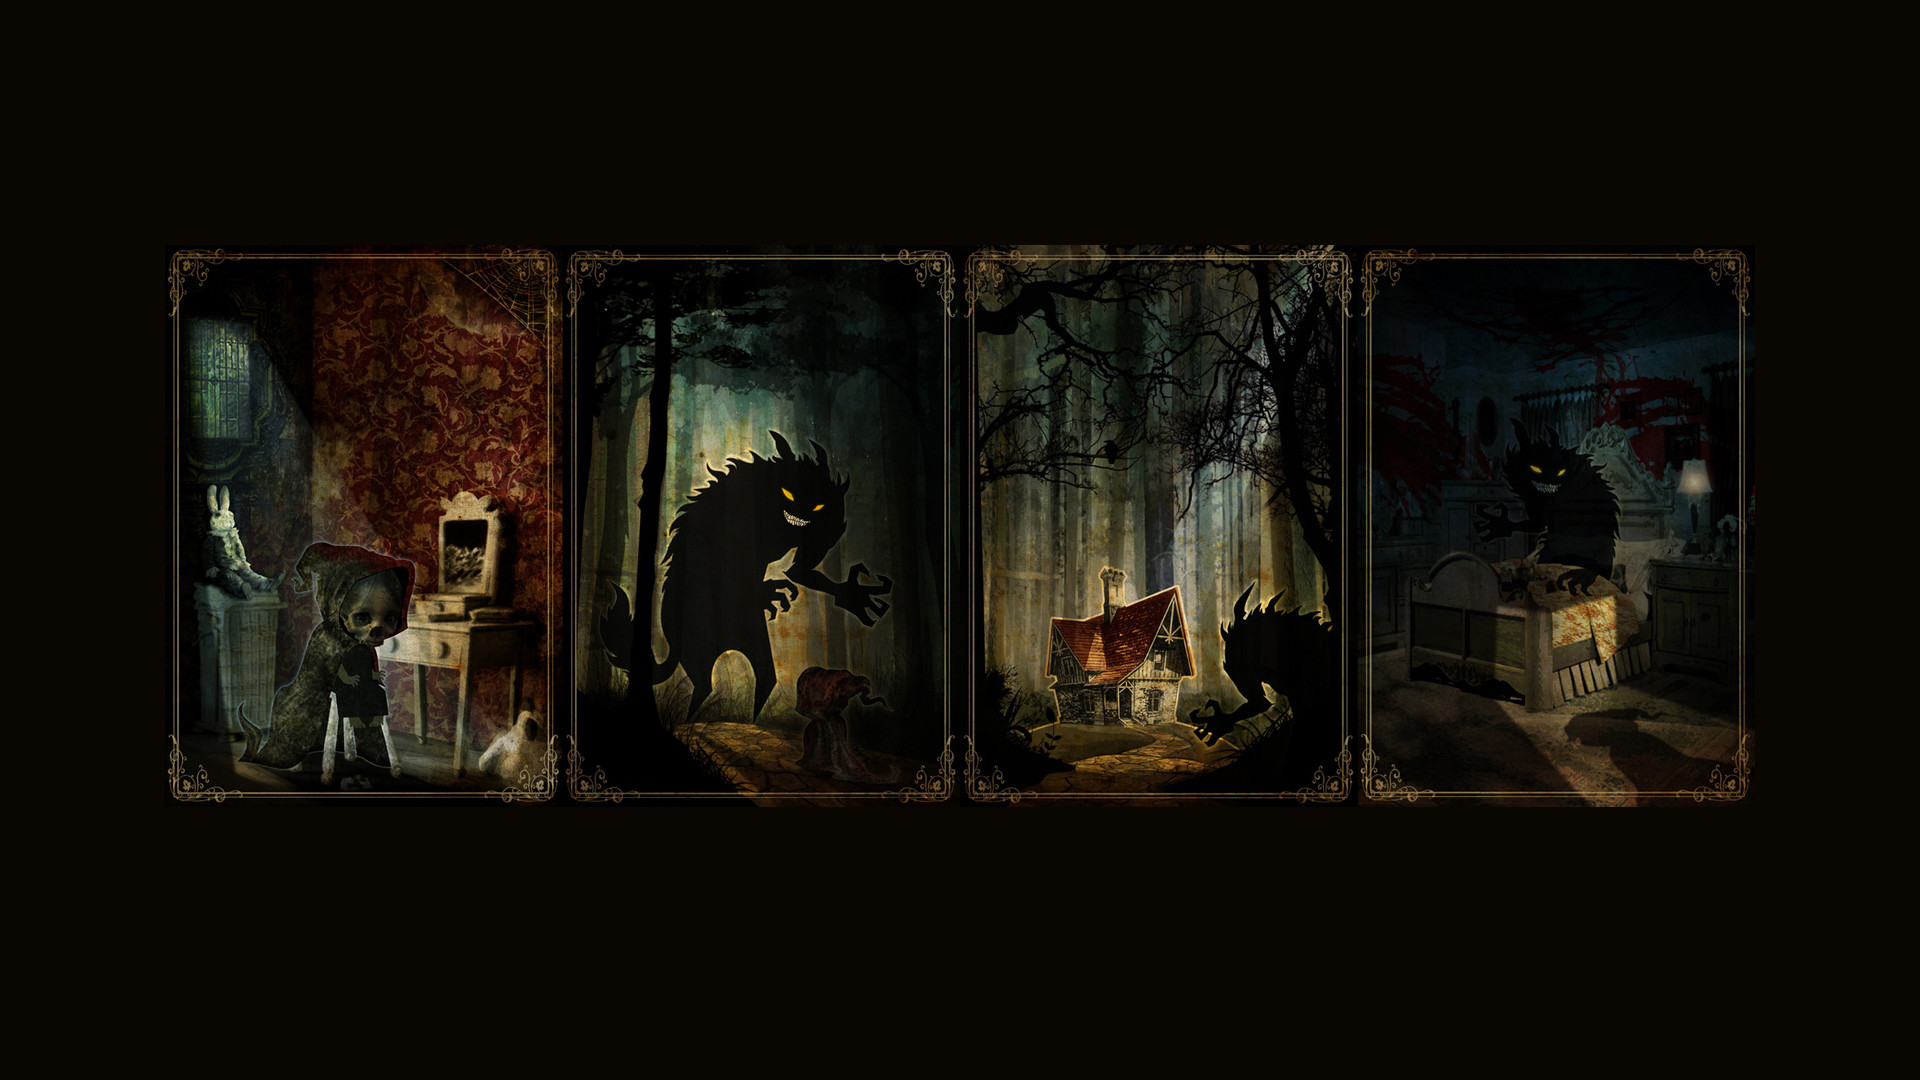 1920x1080 ... Top HD Wallpapers Collection of Little Red Riding Hood And The Wolf -   px, ...